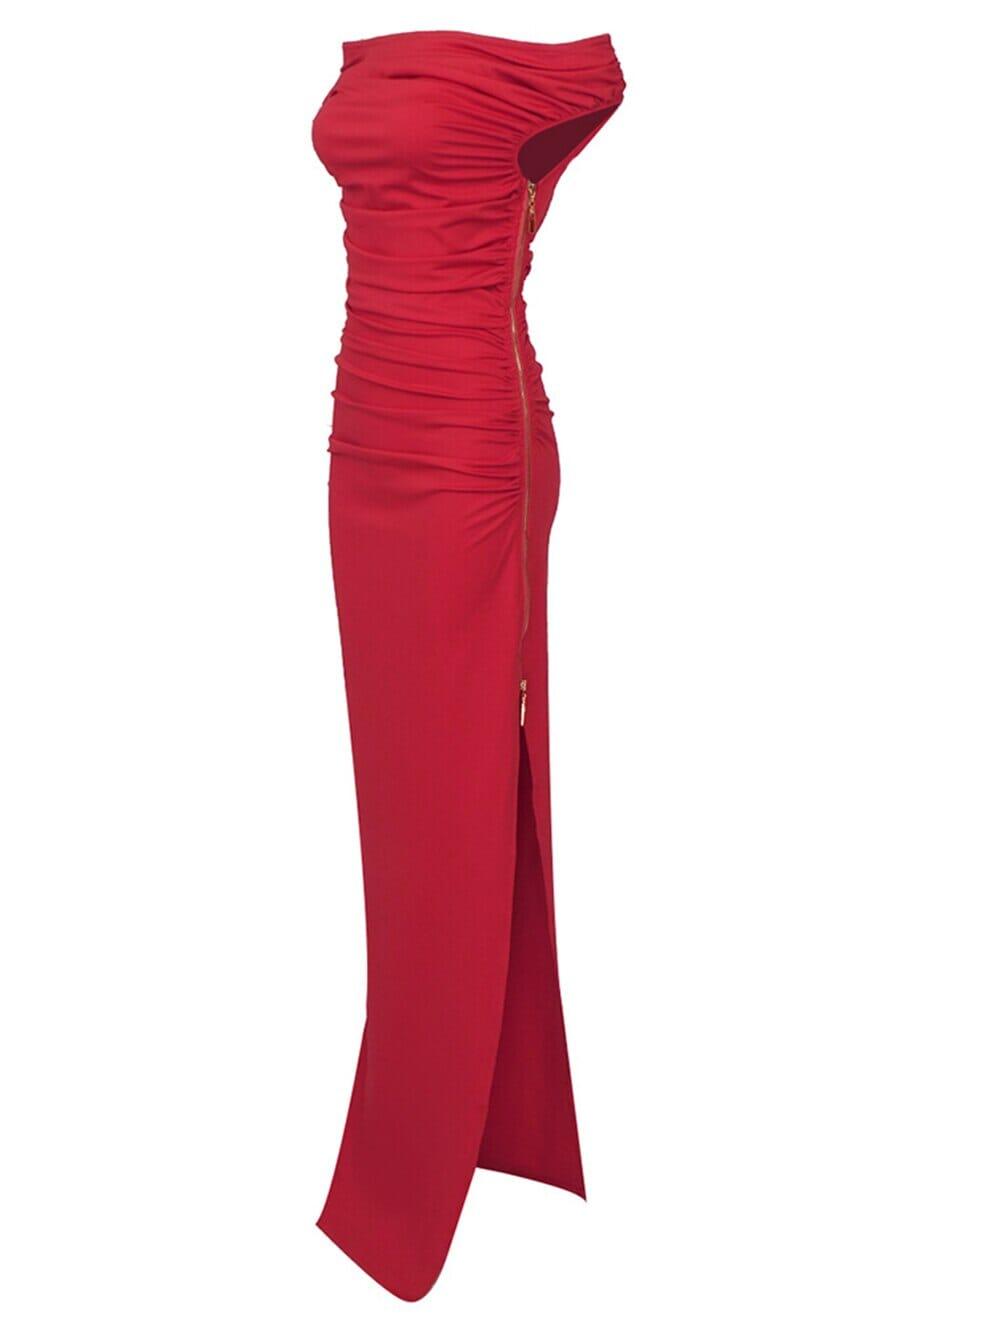 SLASH NECK PLEATED MAXI DRESS IN RED